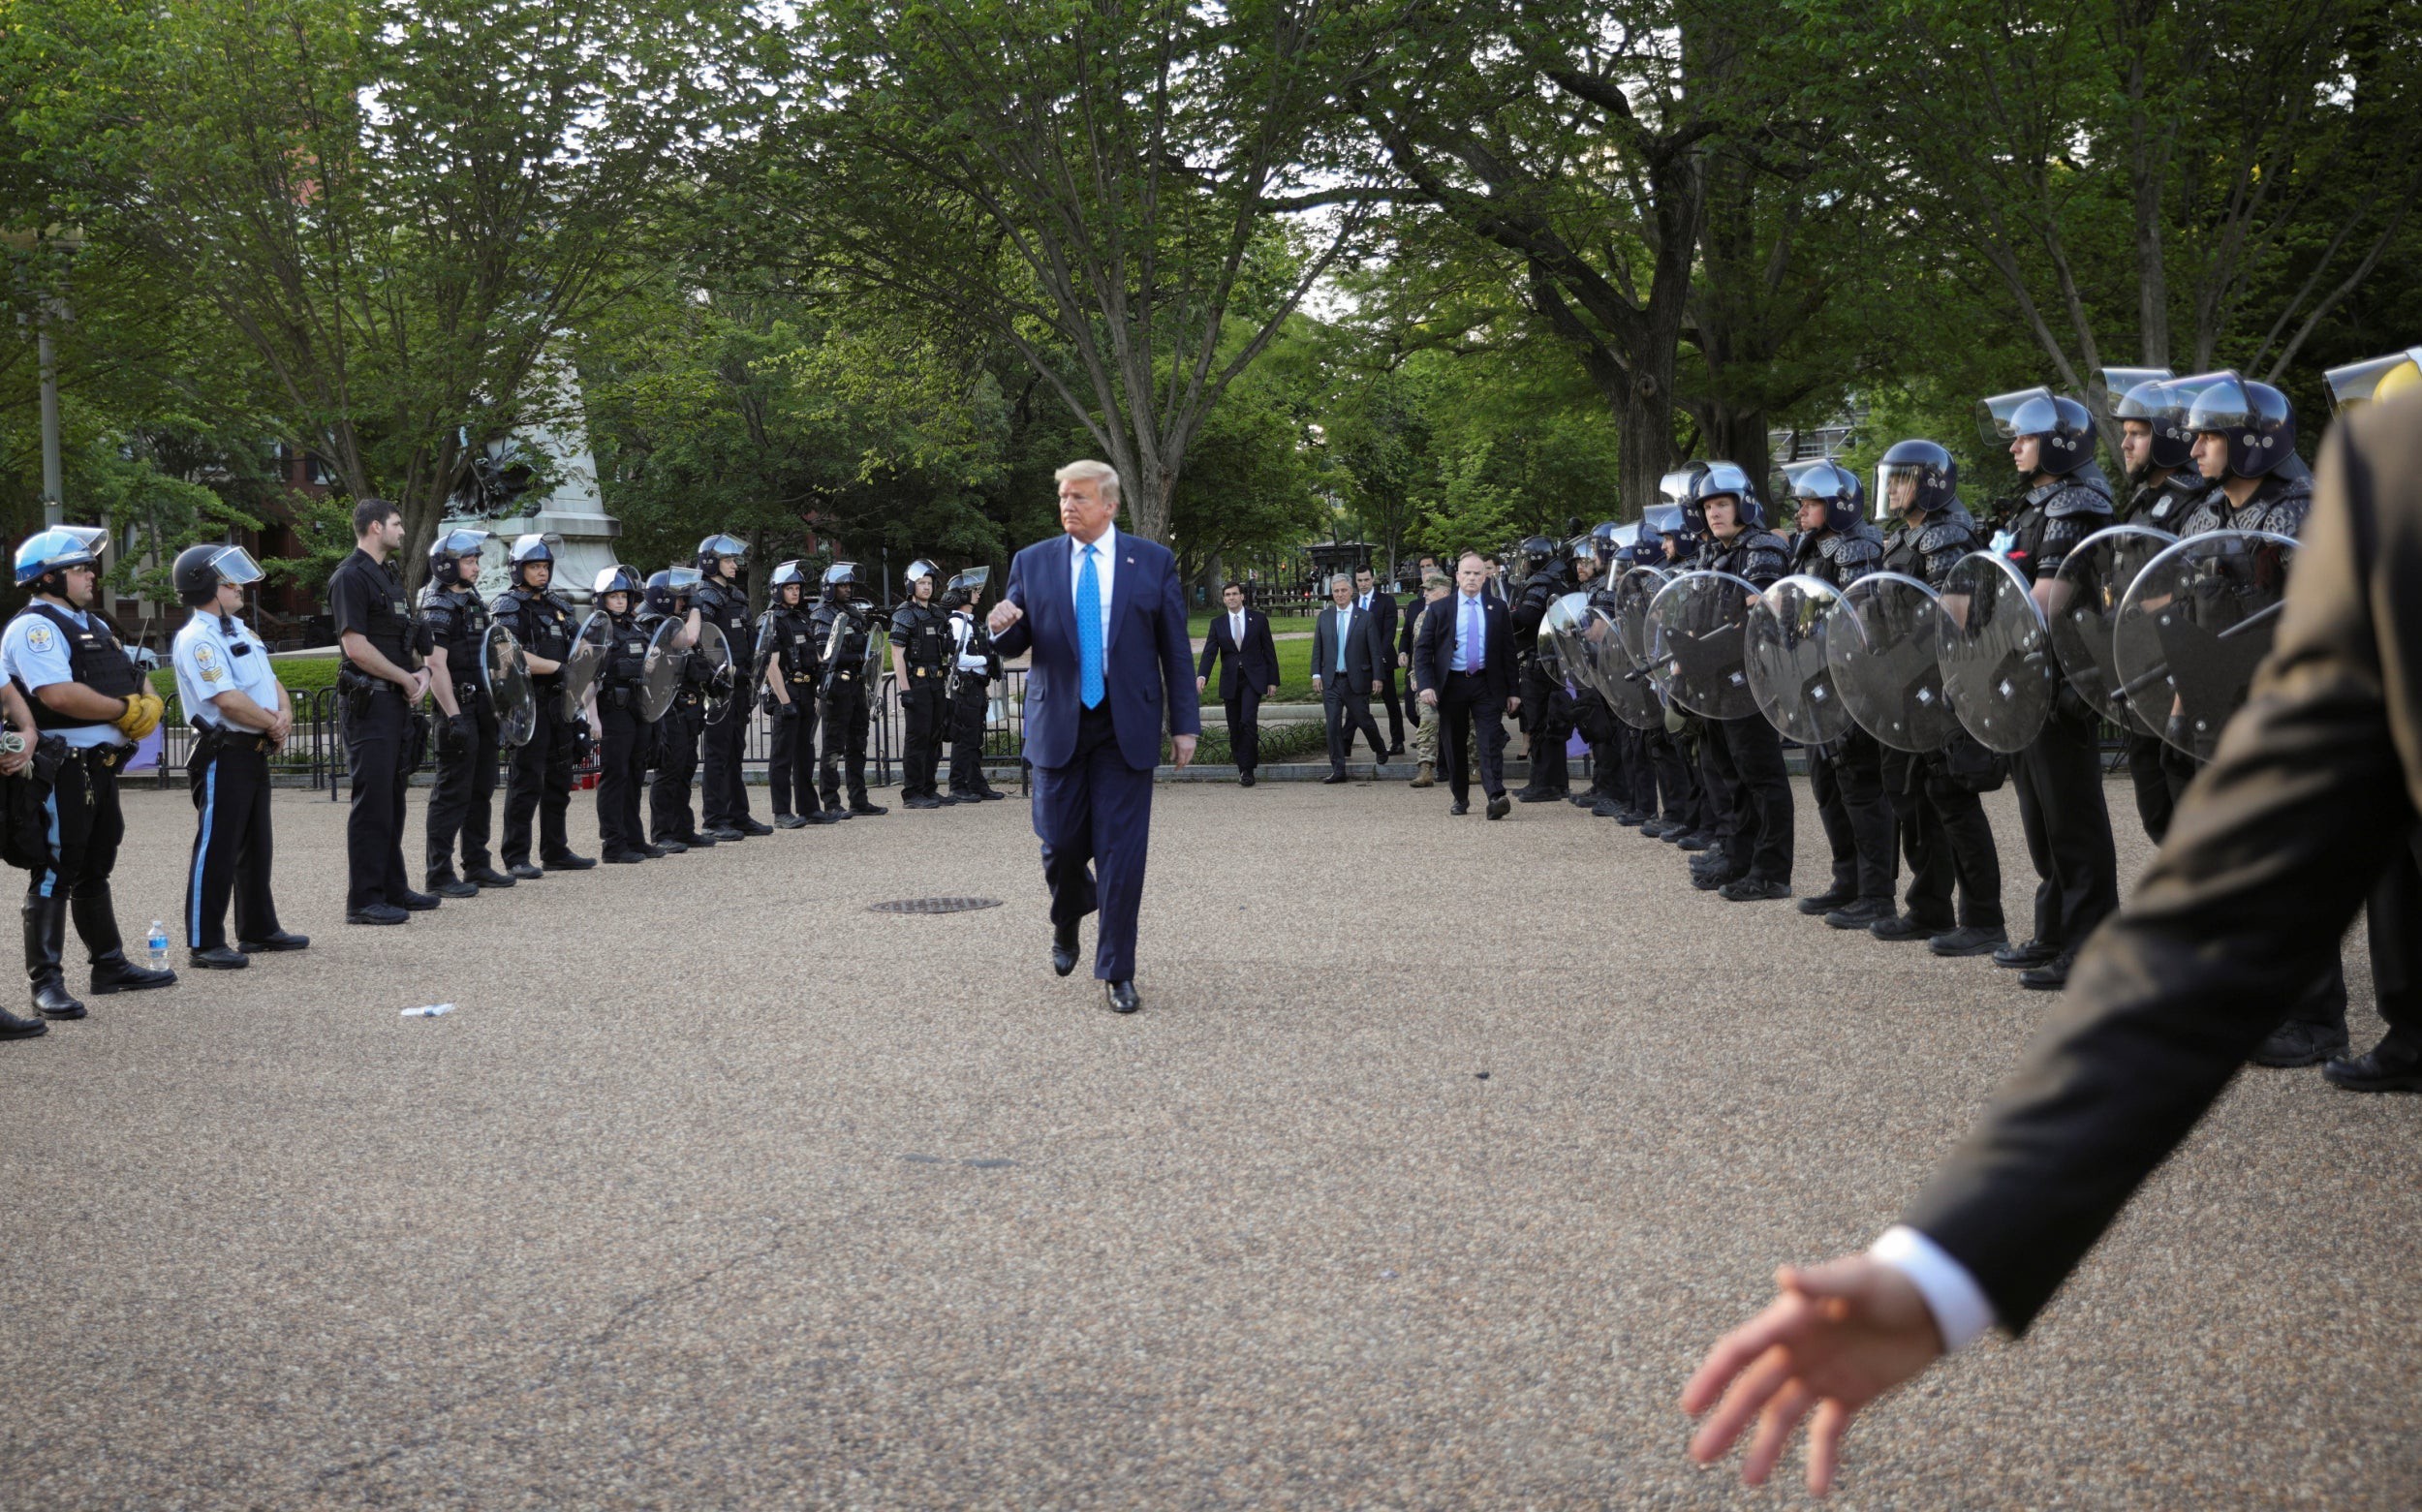 Trump and police